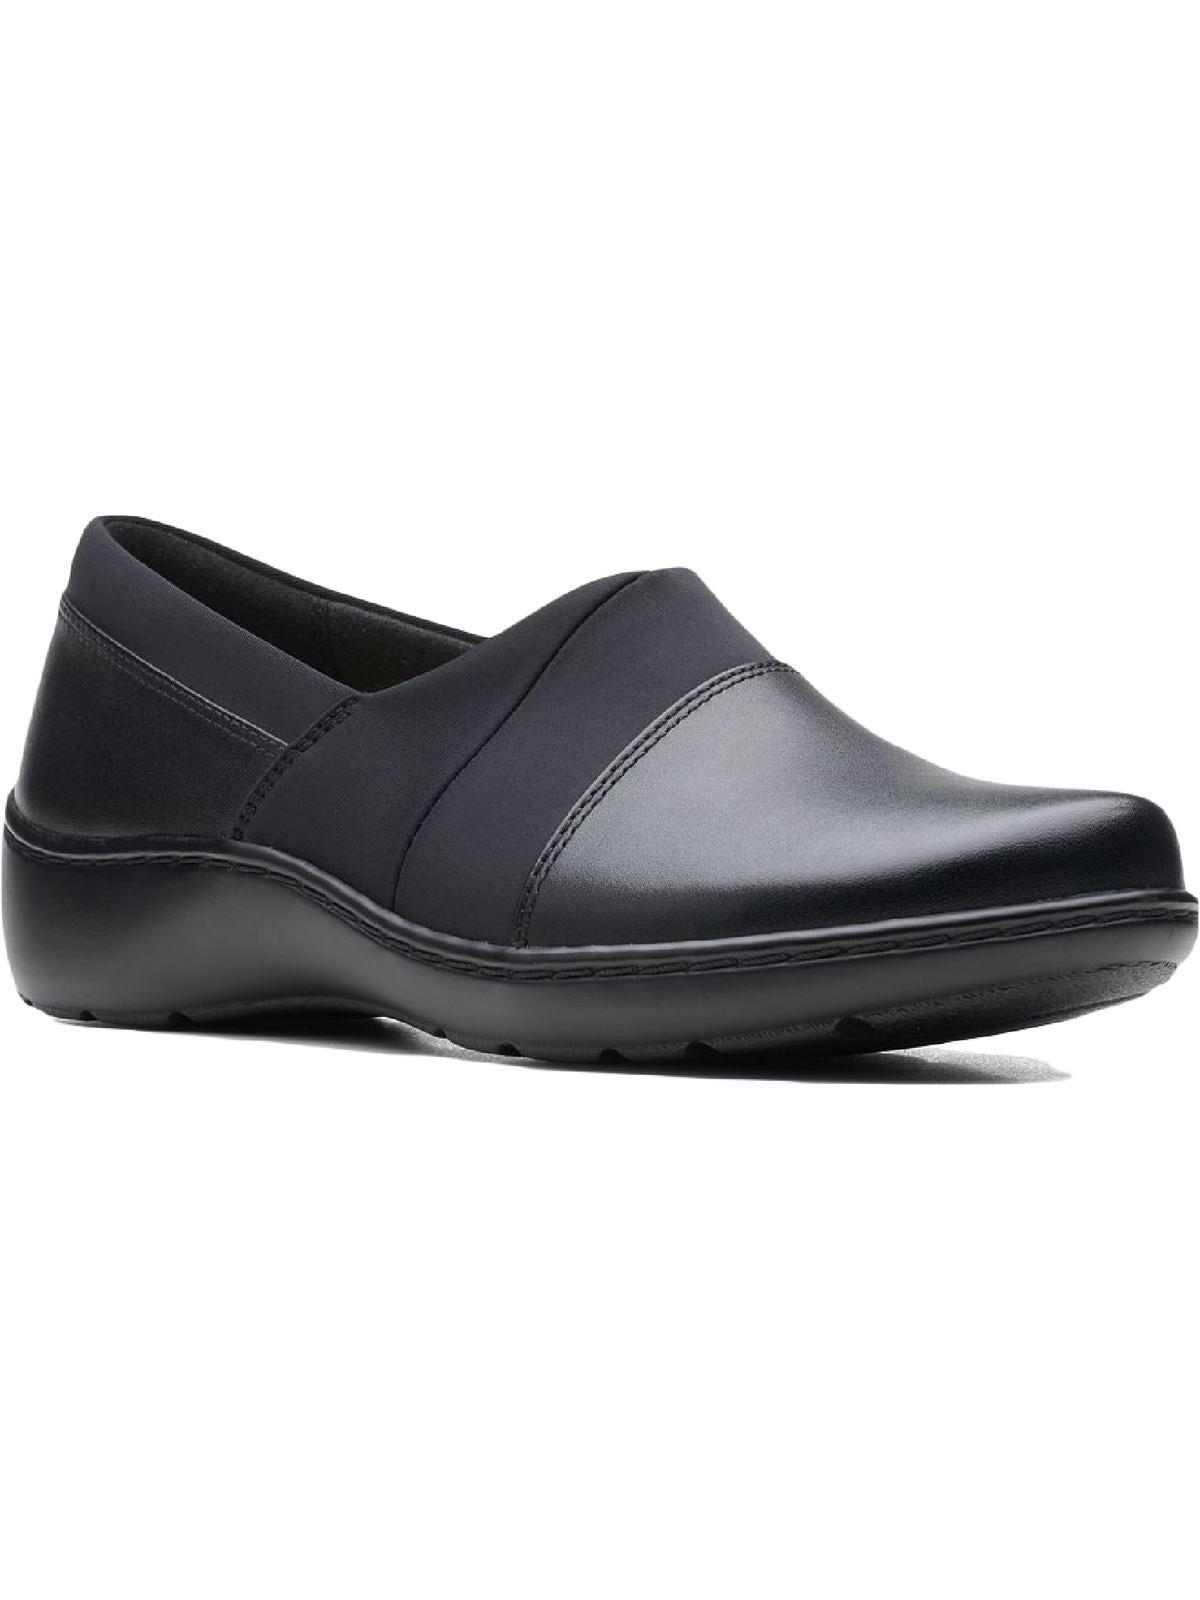 Clarks Cora Heather Comfort Insole Round Toe Slip-on Shoes in Black | Lyst